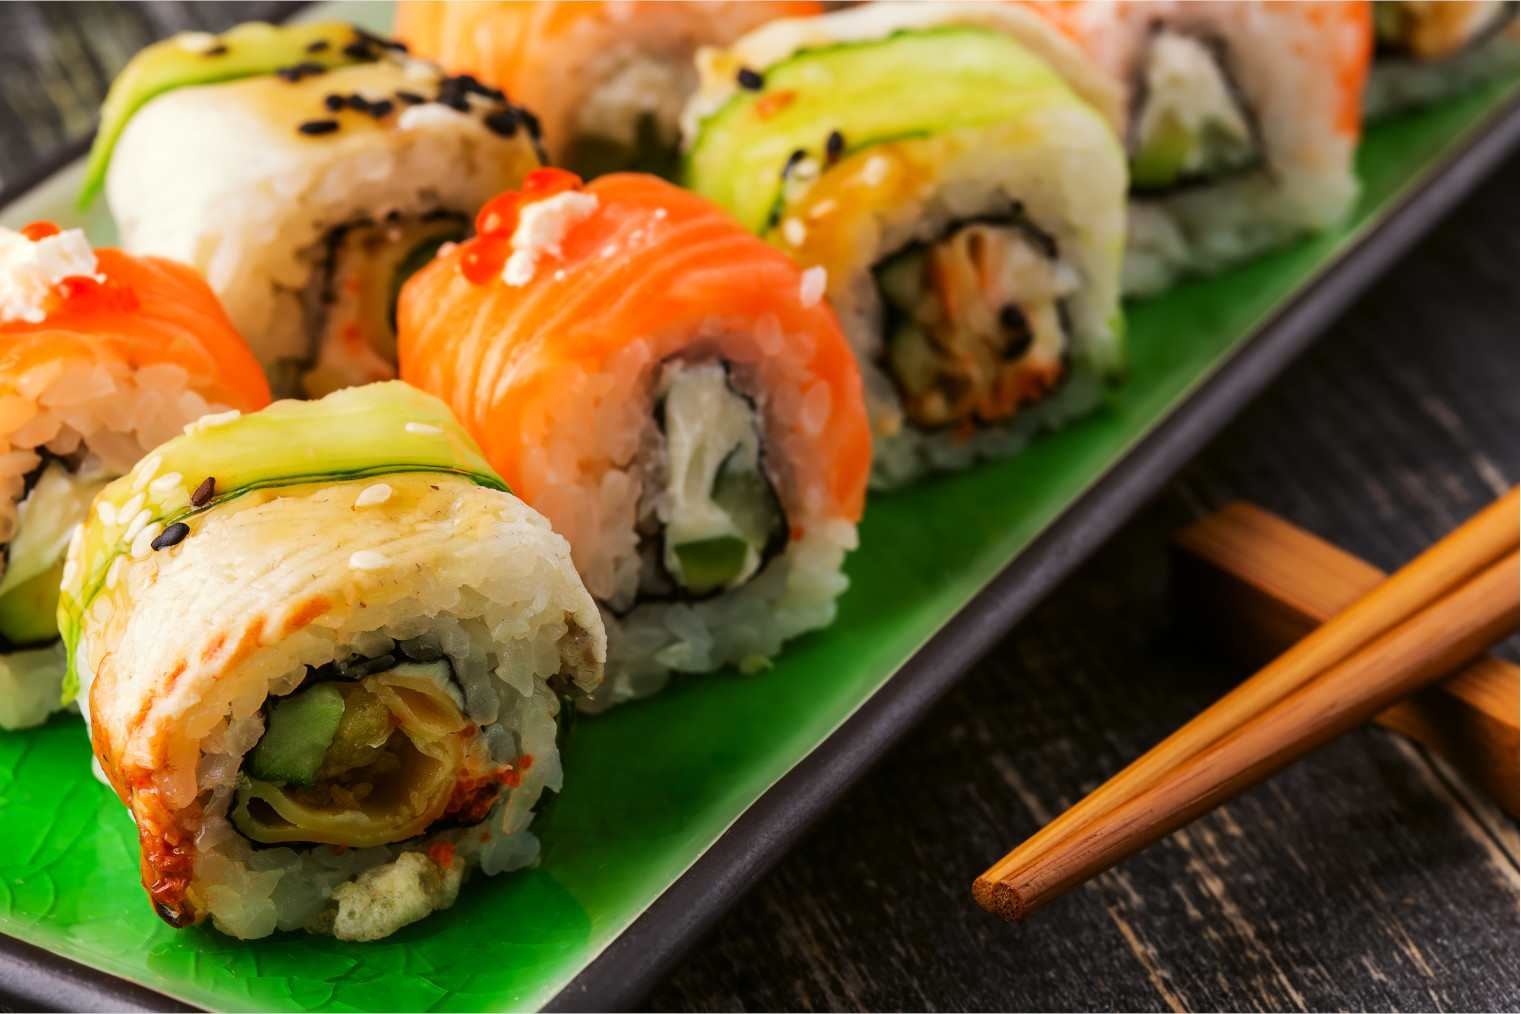 Kin D That & Sushi - Order Online - Delivery - New London